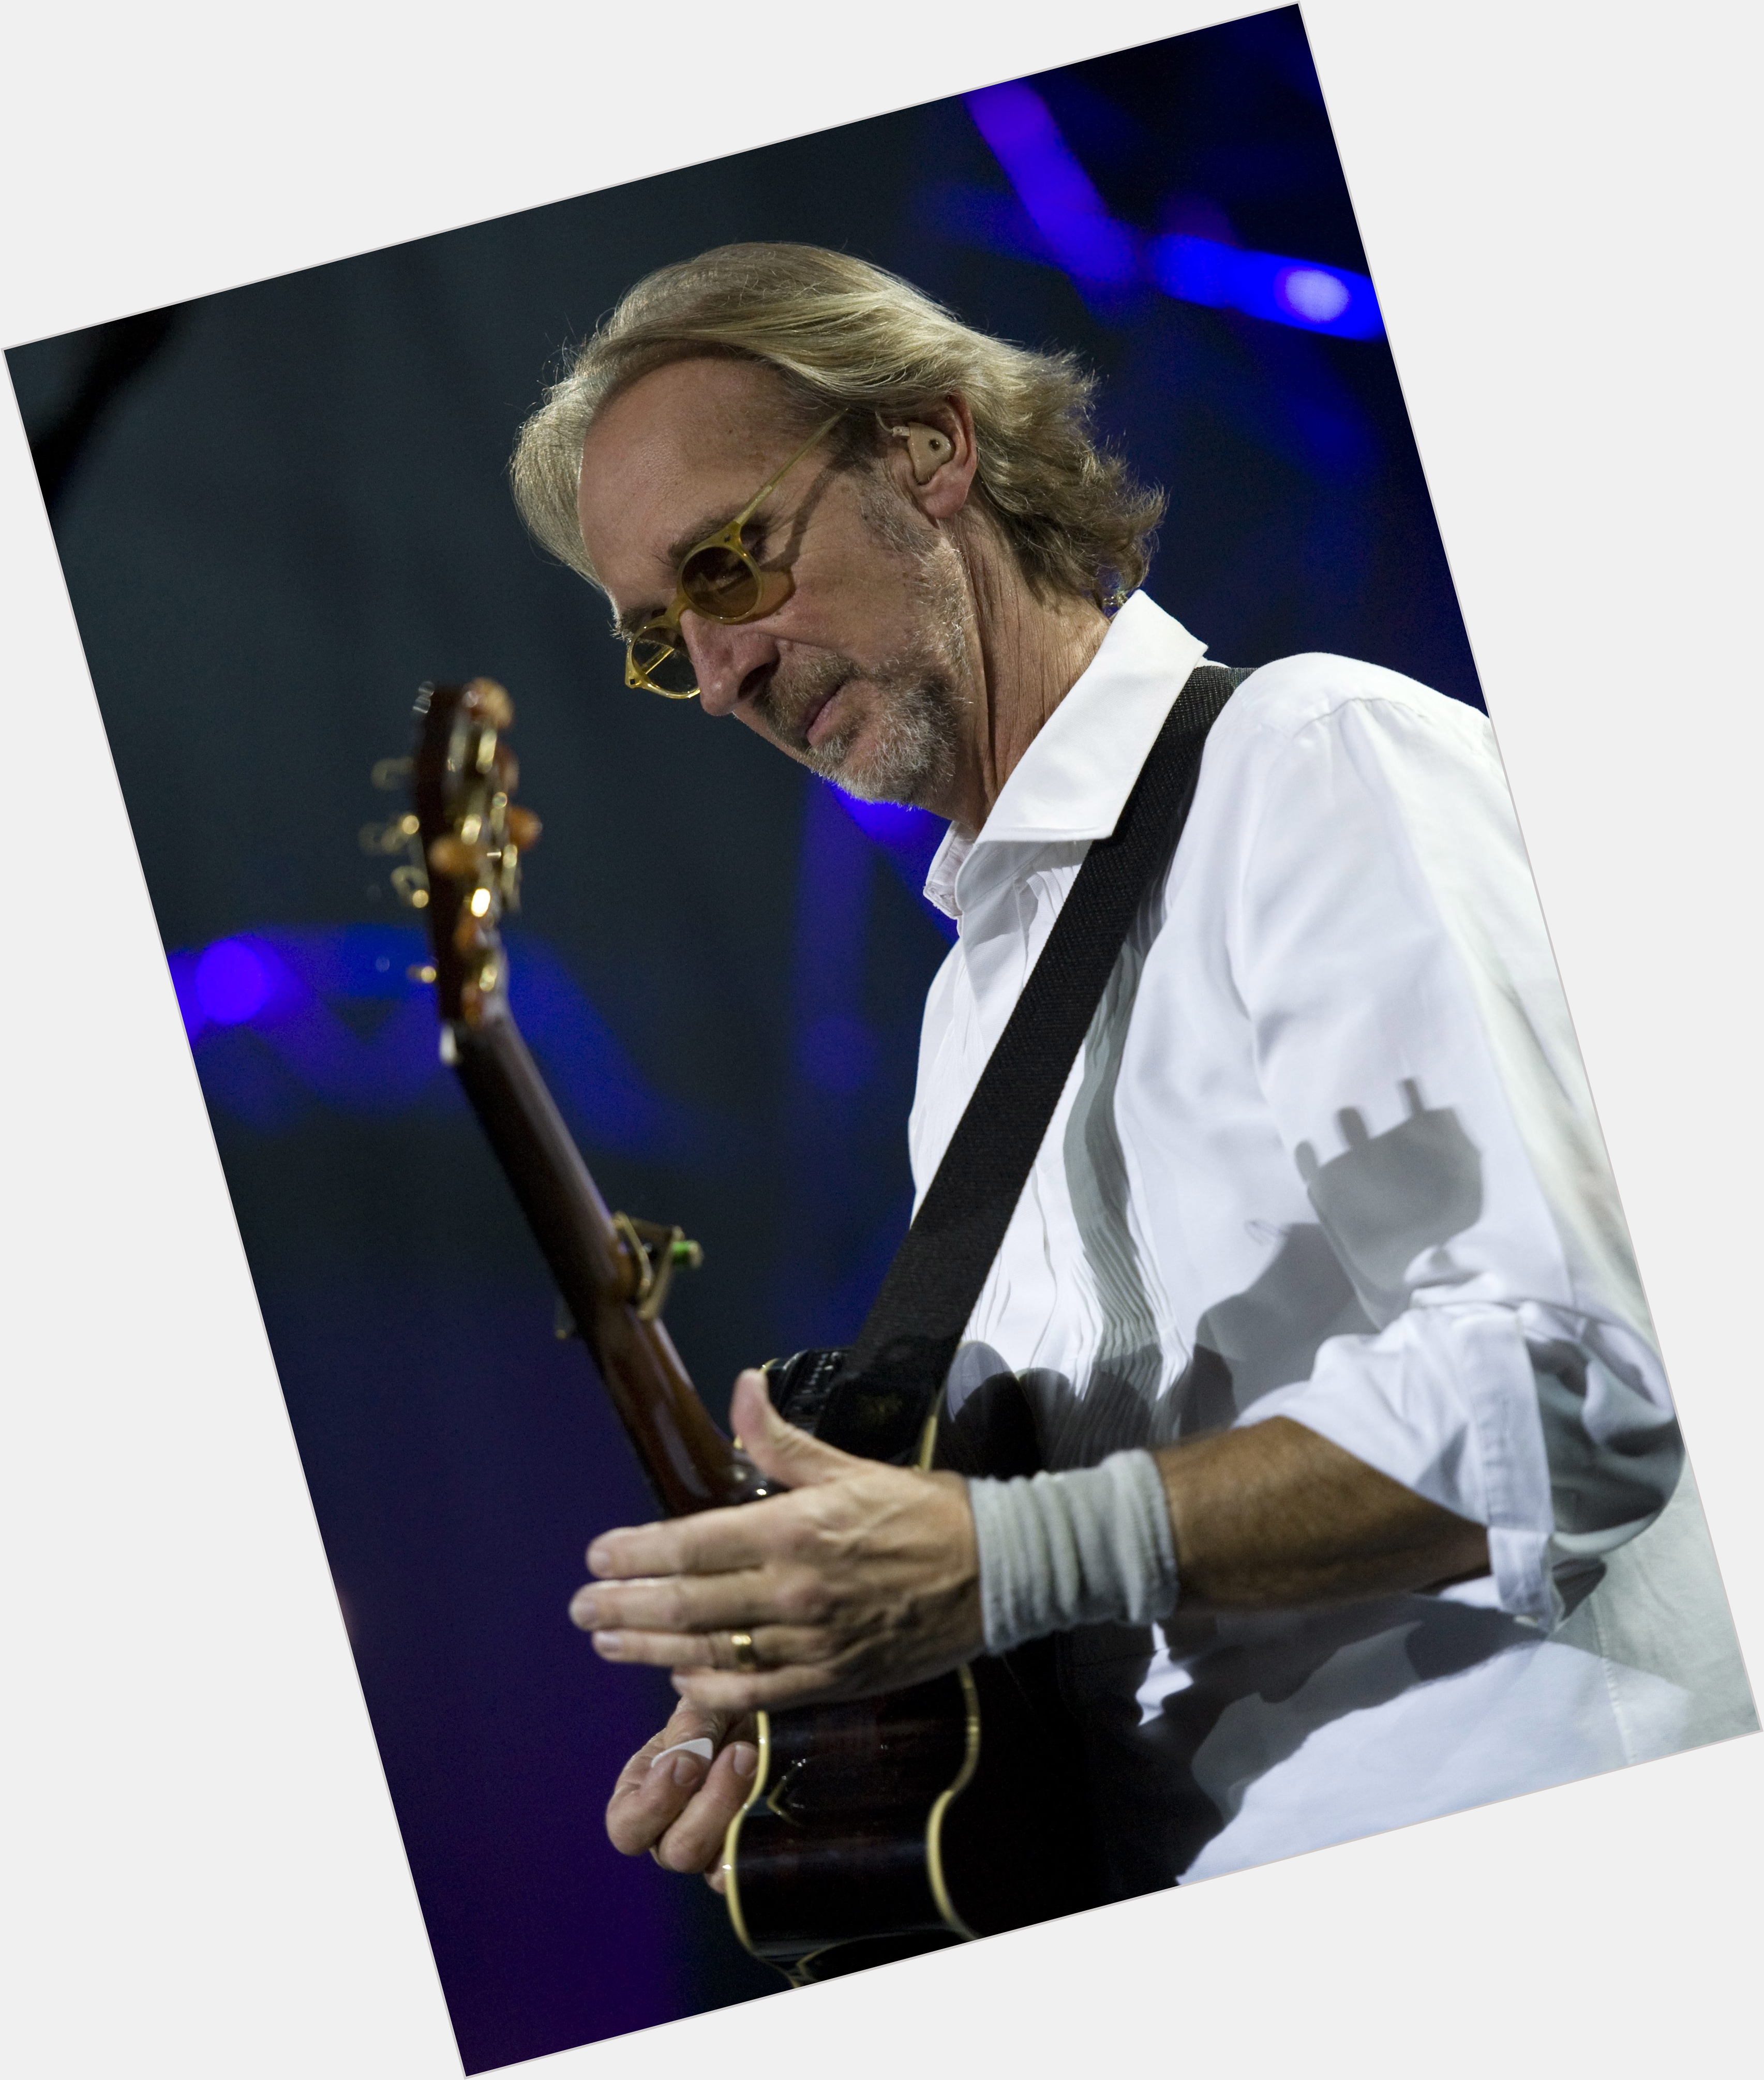 Https://fanpagepress.net/m/M/Mike Rutherford New Pic 1